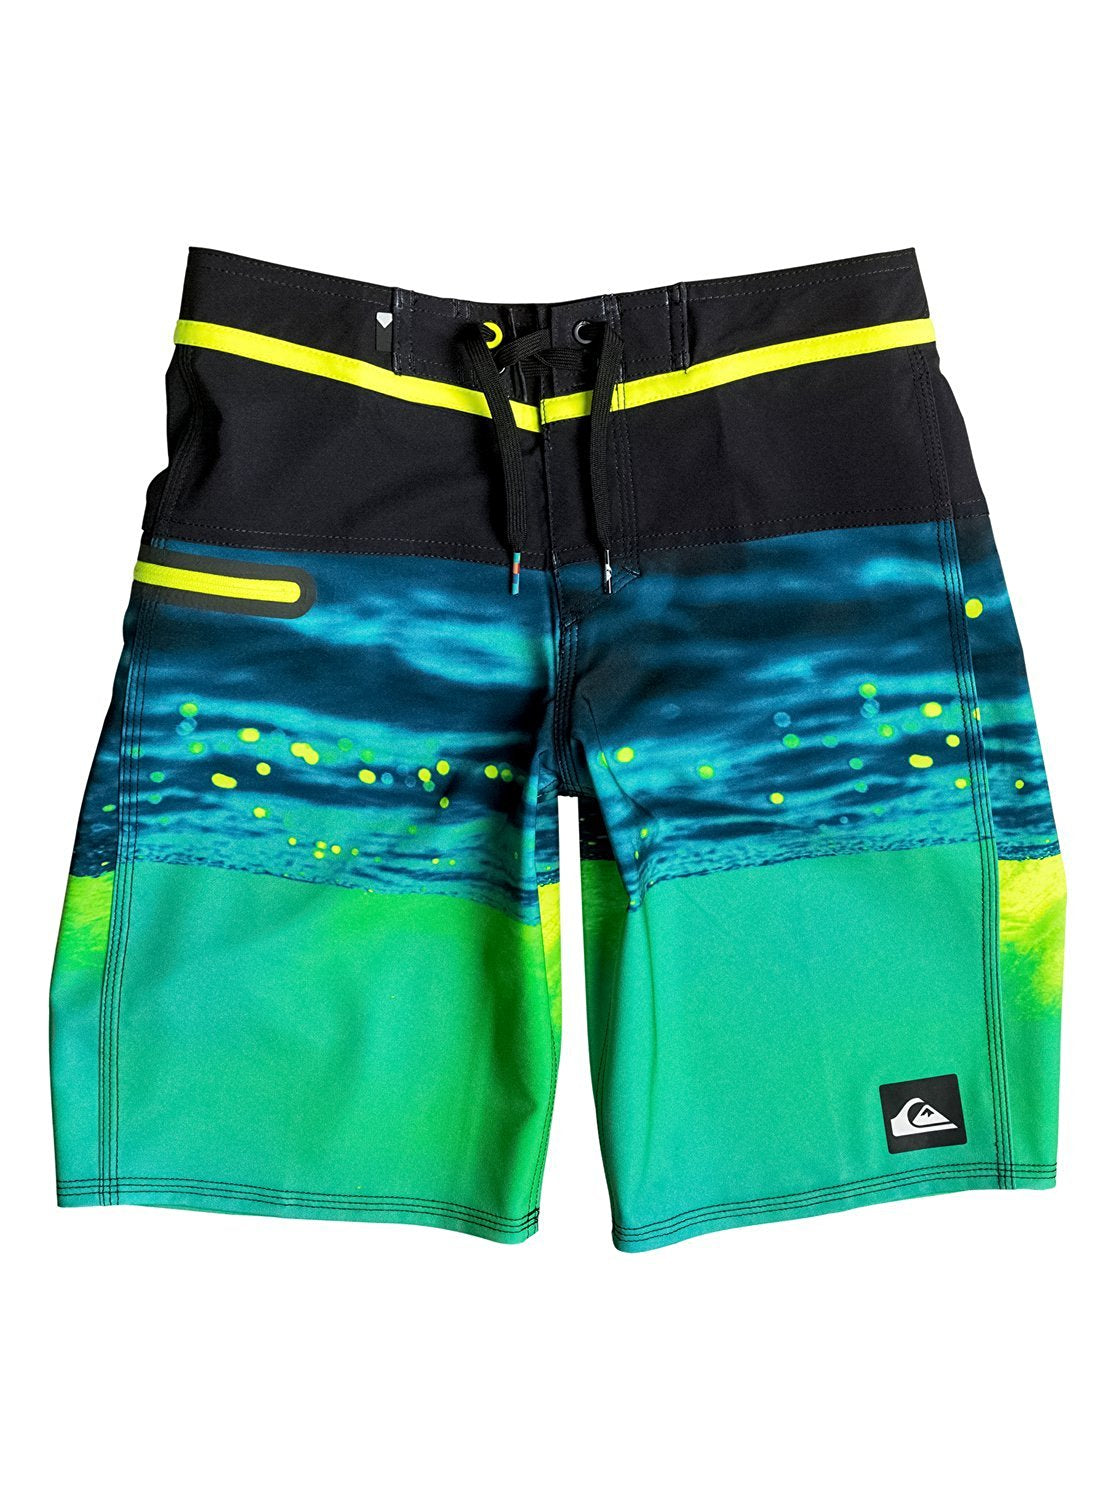 Quiksilver Hold Down Vee Youth Boardshort